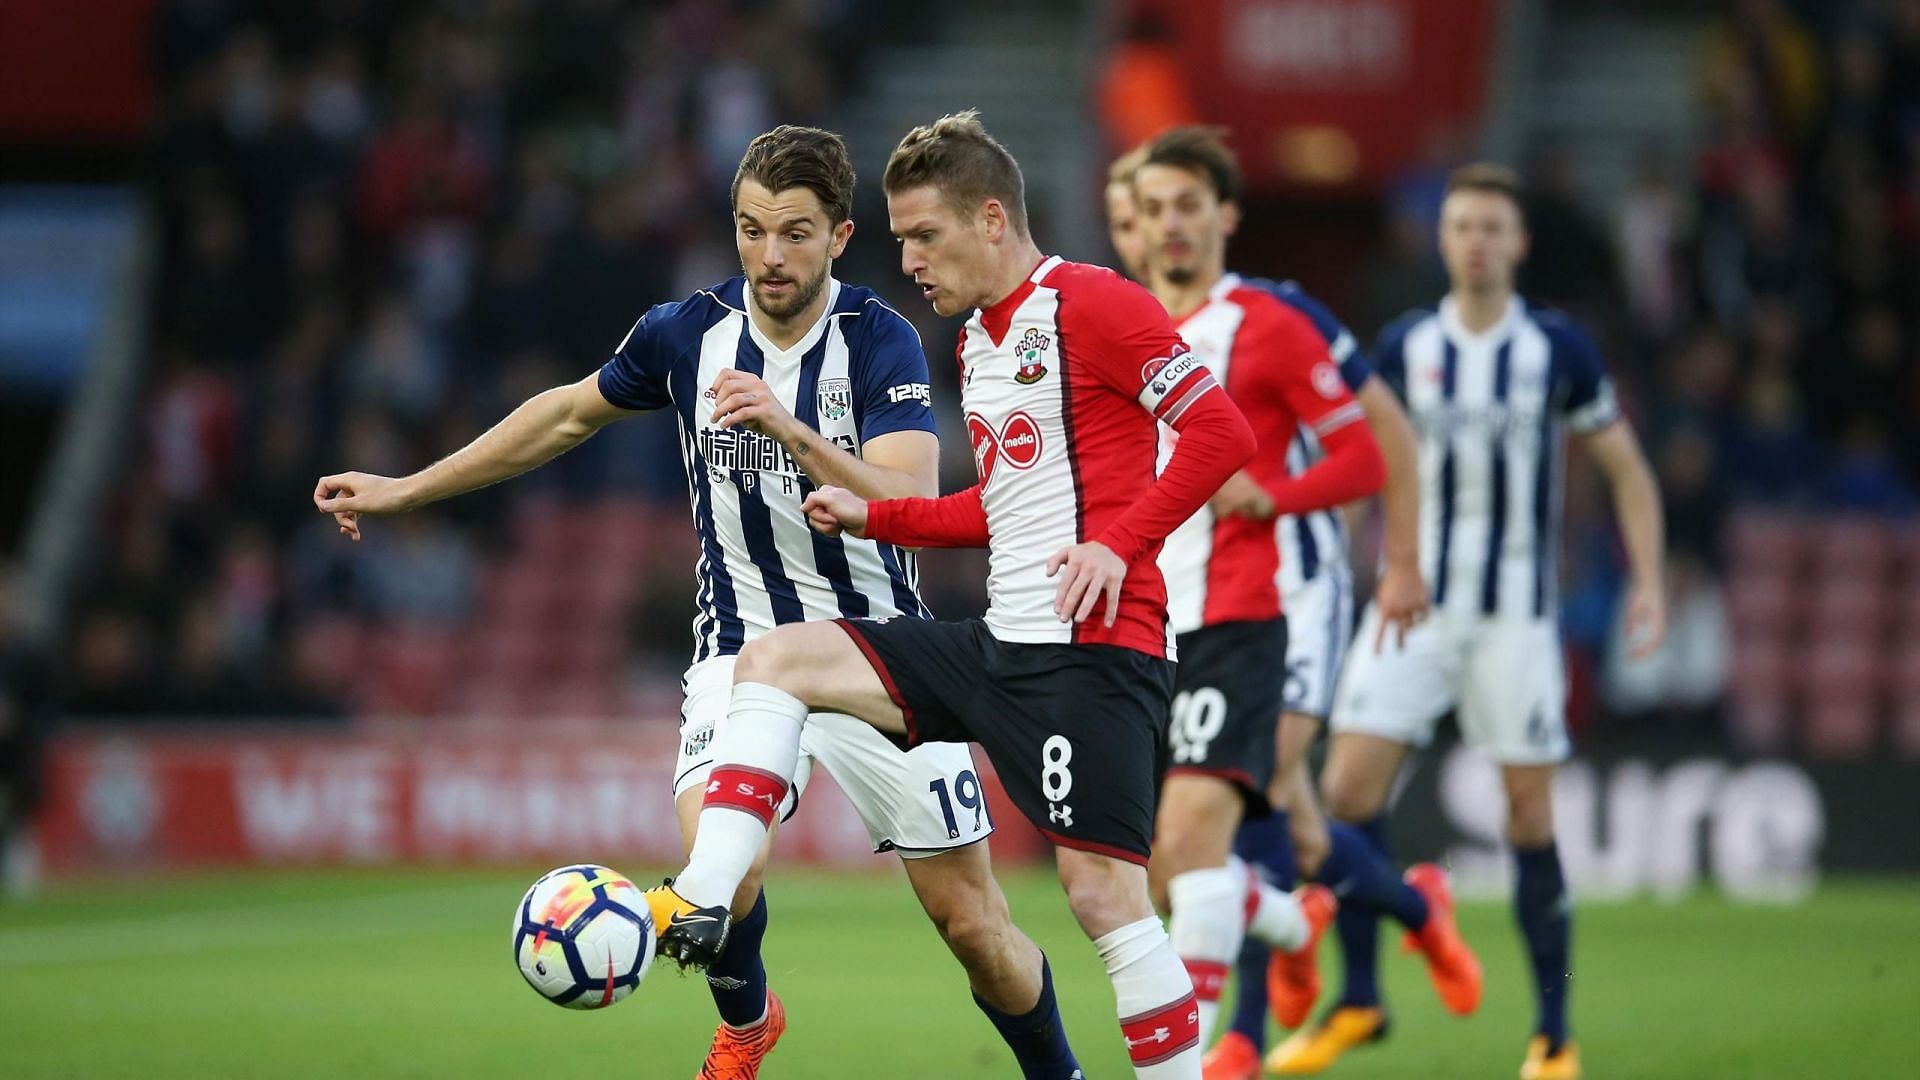 Southampton have won eight of their last 10 clashes with West Brom